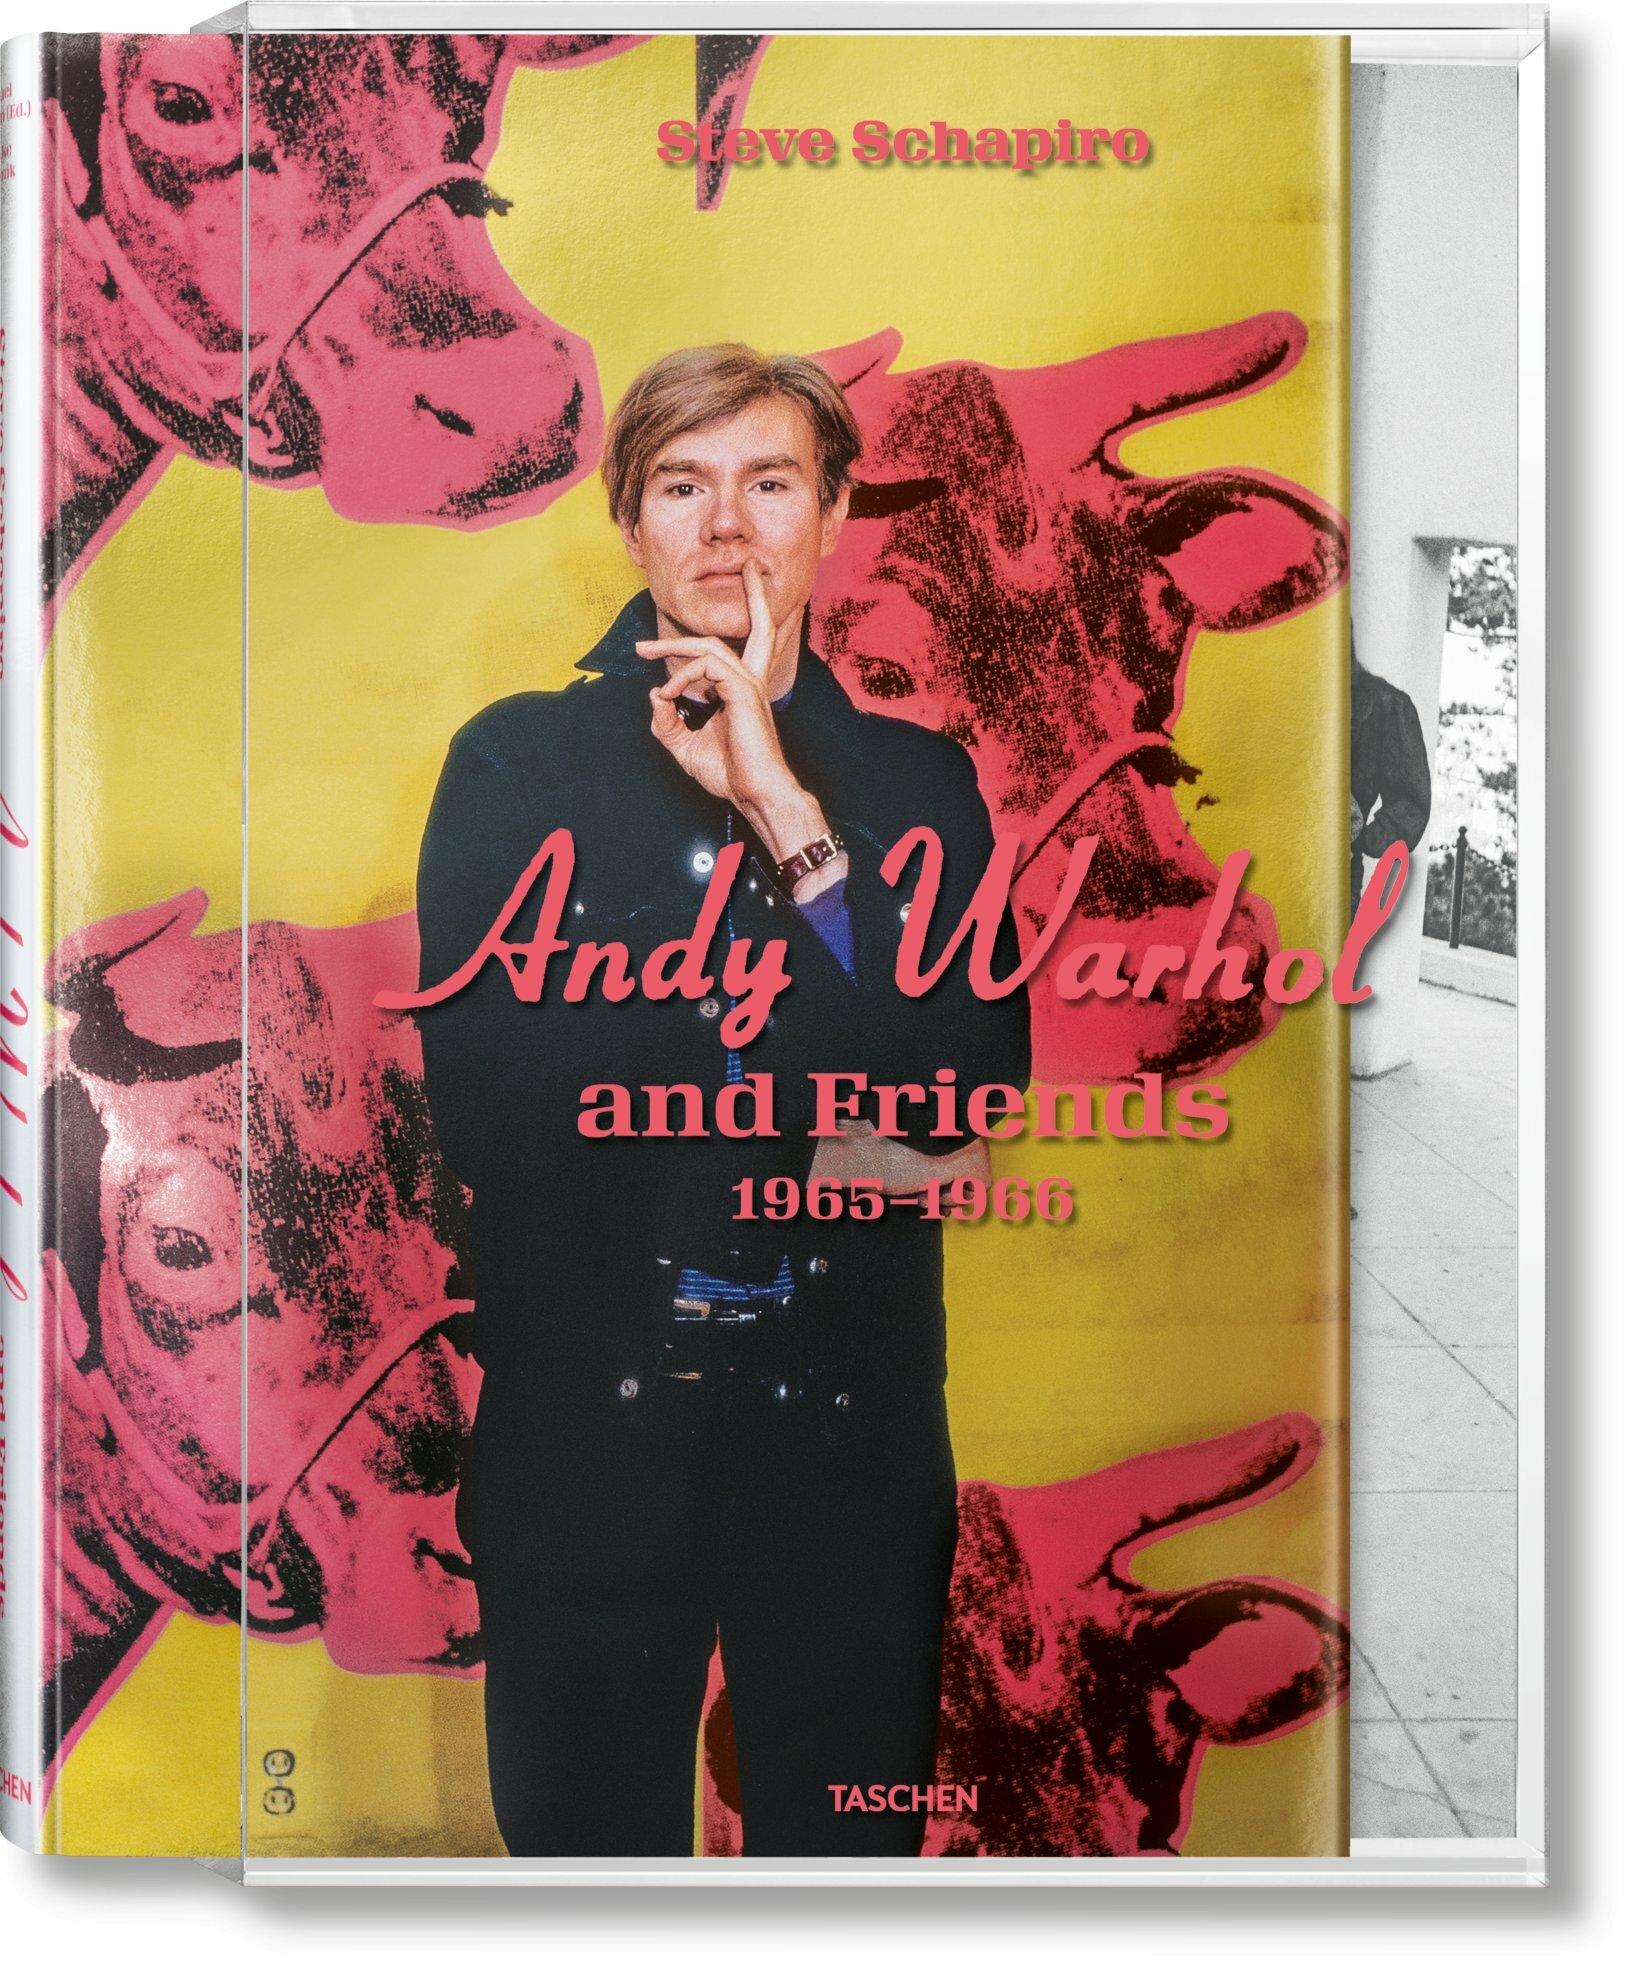 Pop Life.
Pictures of Andy Warhol by Steve Schapiro.
In 1965, Steve Schapiro started documenting Andy Warhol for Life magazine: Warhol was cementing a reputation as an important Pop artist who drew his inspiration from popular culture and